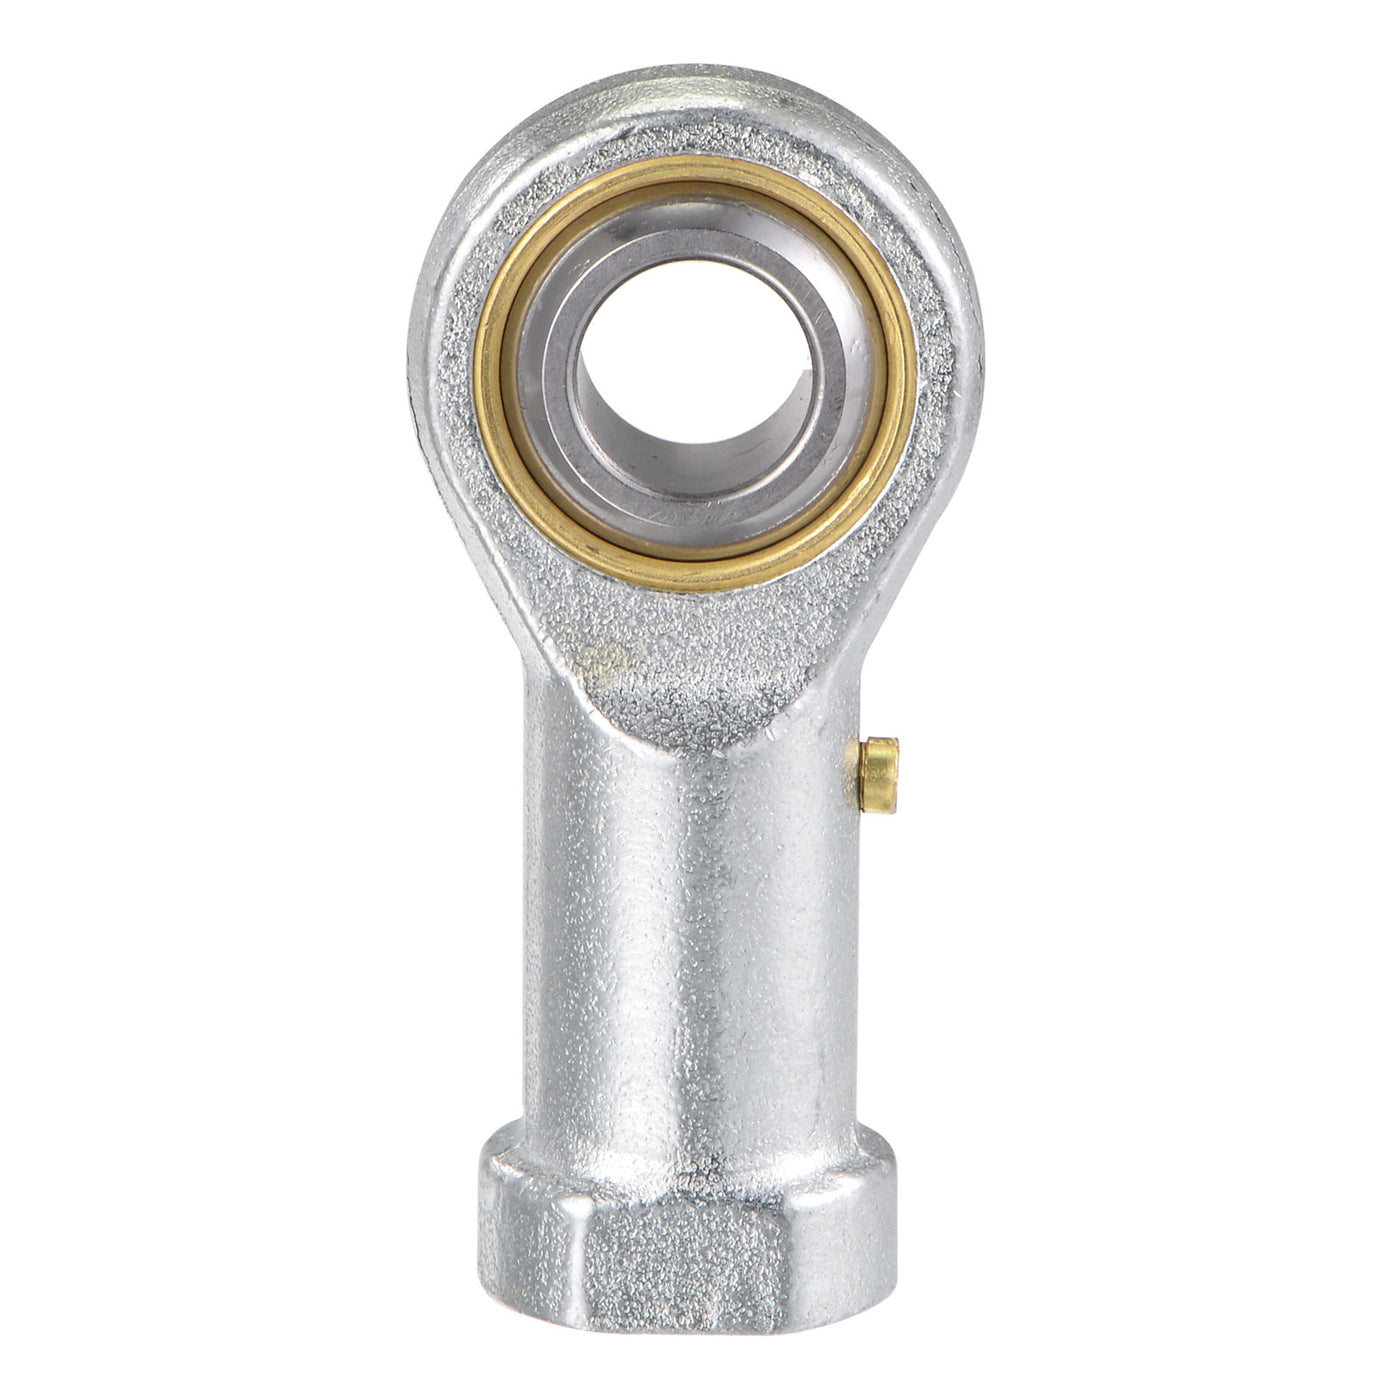 uxcell Uxcell PHS12 Rod End Bearing 12mm Bore Self-lubricated M12x1.75 Left Hand Female Thread